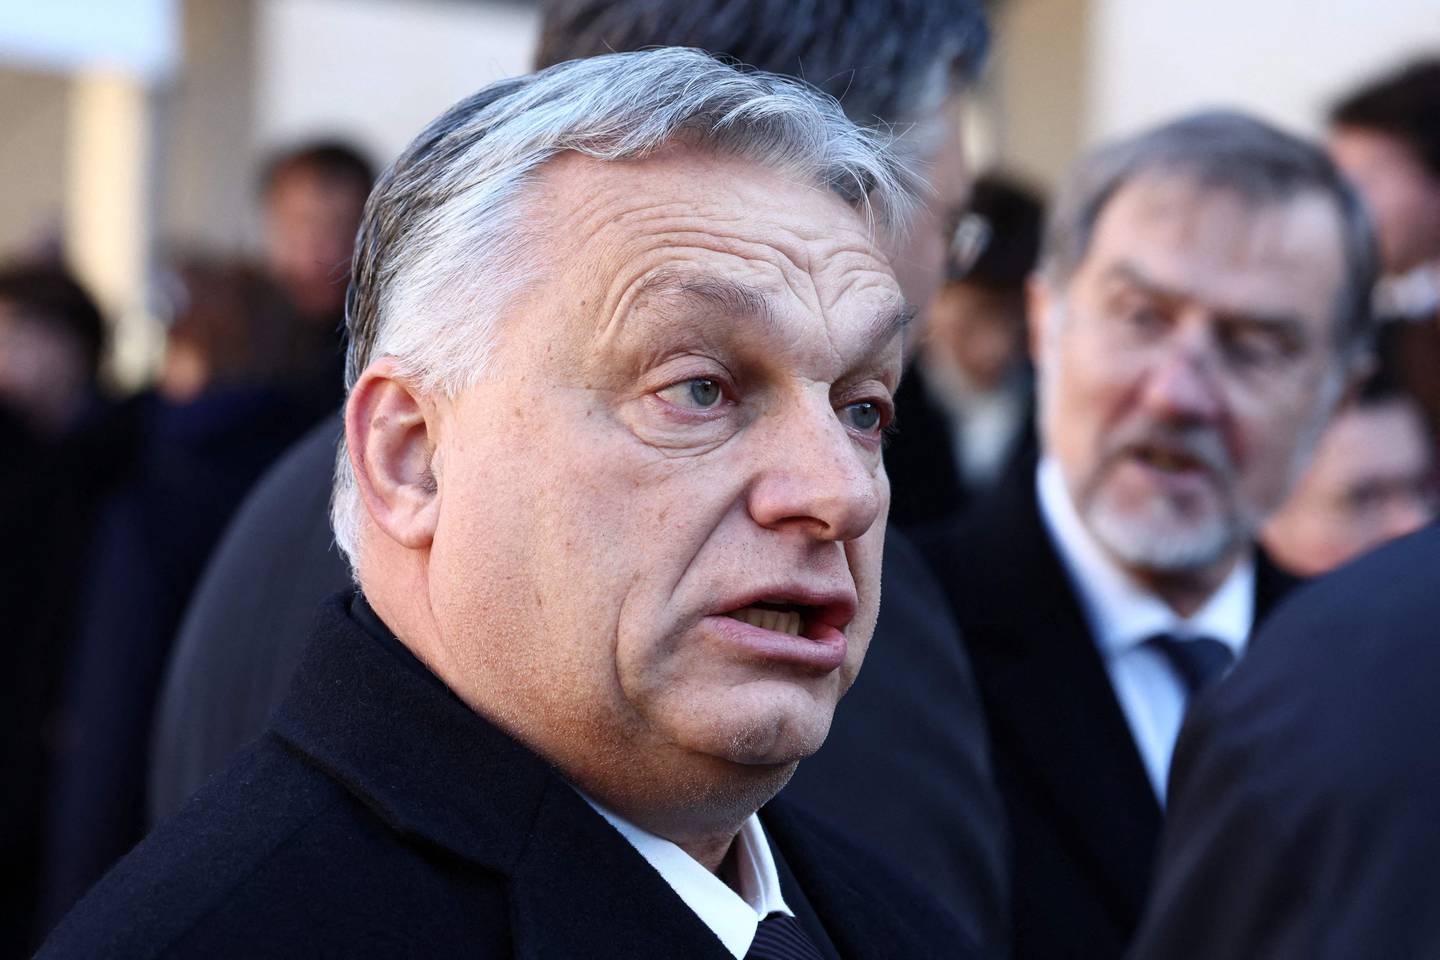 Hungary's Prime Minister Viktor Orban attends a national tribute ceremony for late French minister and European Union Commission president Jacques Delors at the Hotel des Invalides in Paris, on January 5, 2024. Delors, a key figure in the creation of the euro, died on December 27, 2023 aged 98. (Photo by STEPHANIE LECOCQ / POOL / AFP)